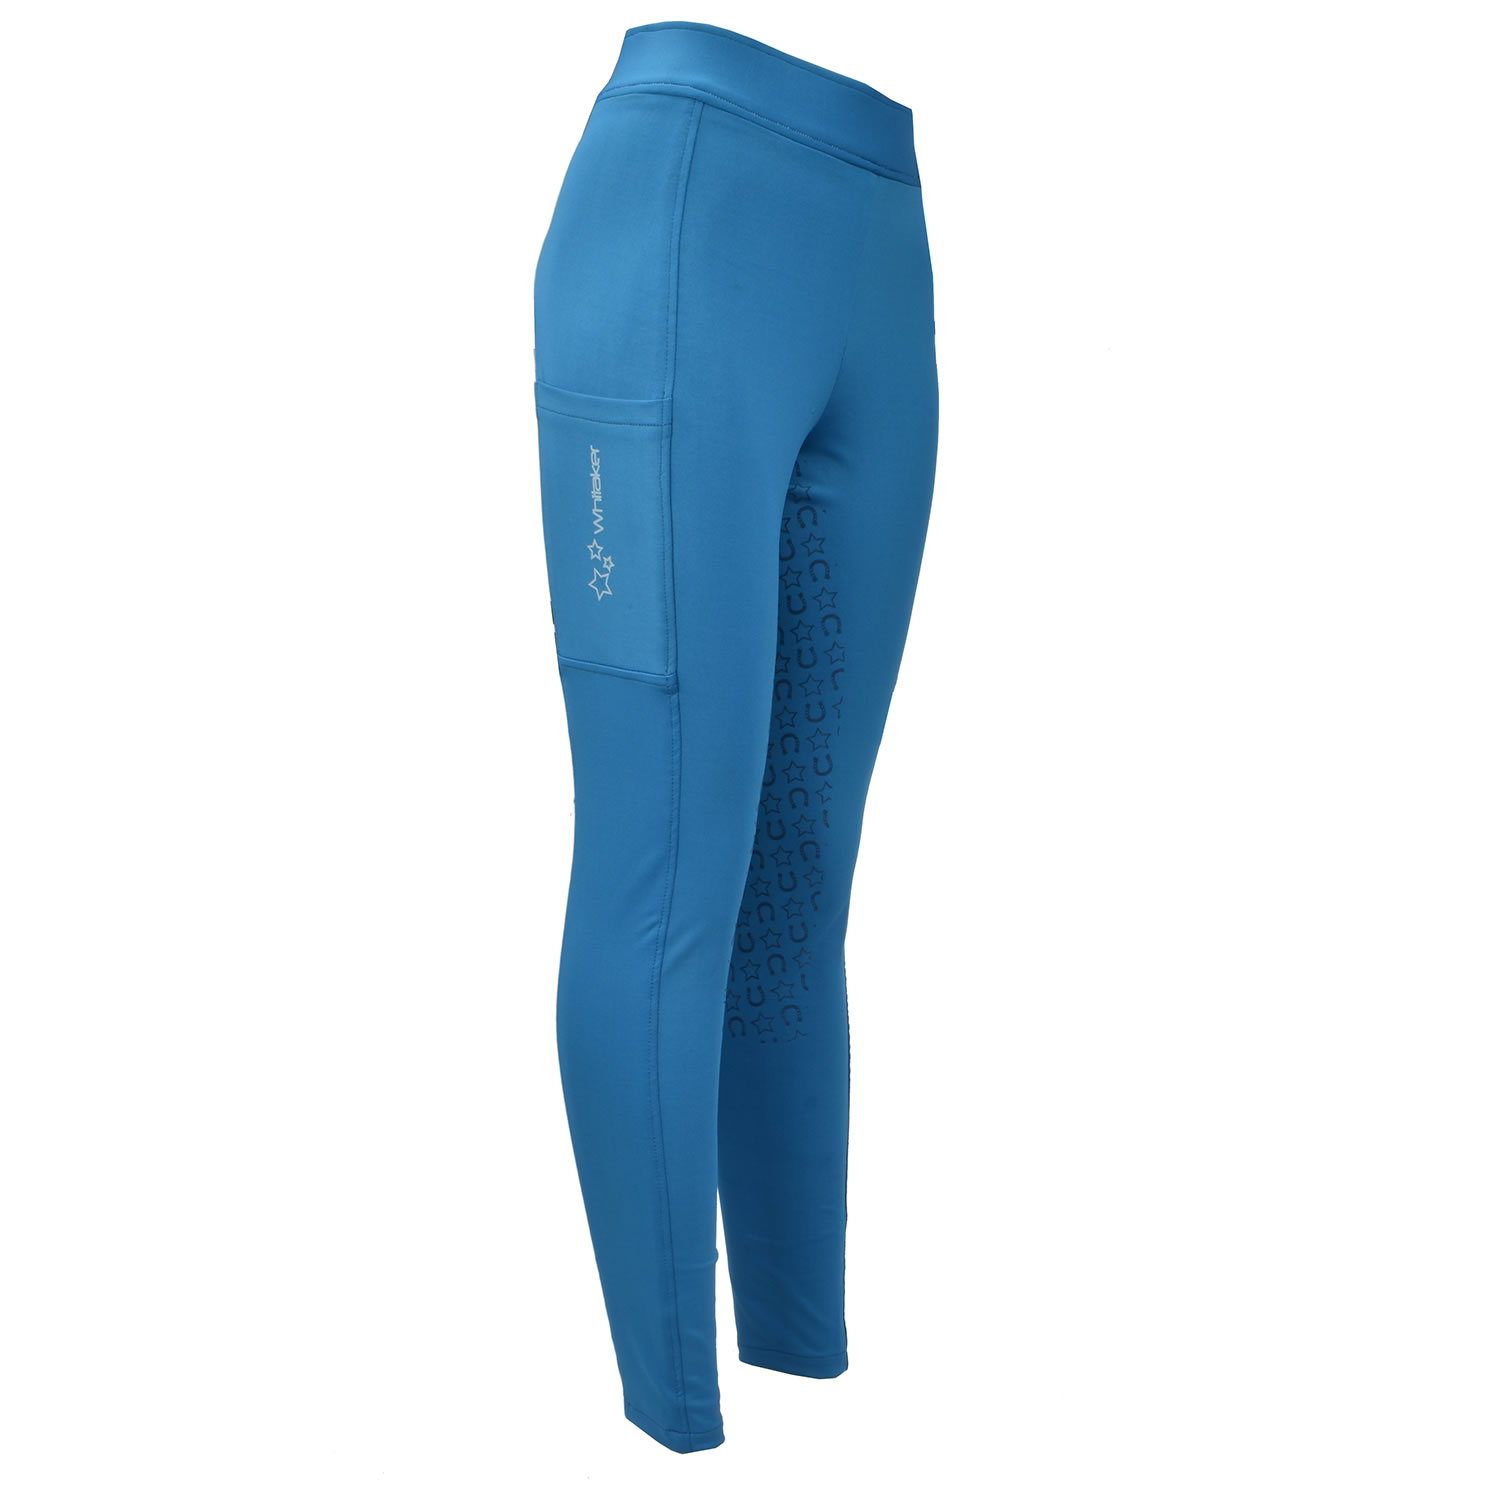 WHITAKER CLITHEROE RIDING TIGHTS CHILD BLUE  AGE 9 - 10 CHILD